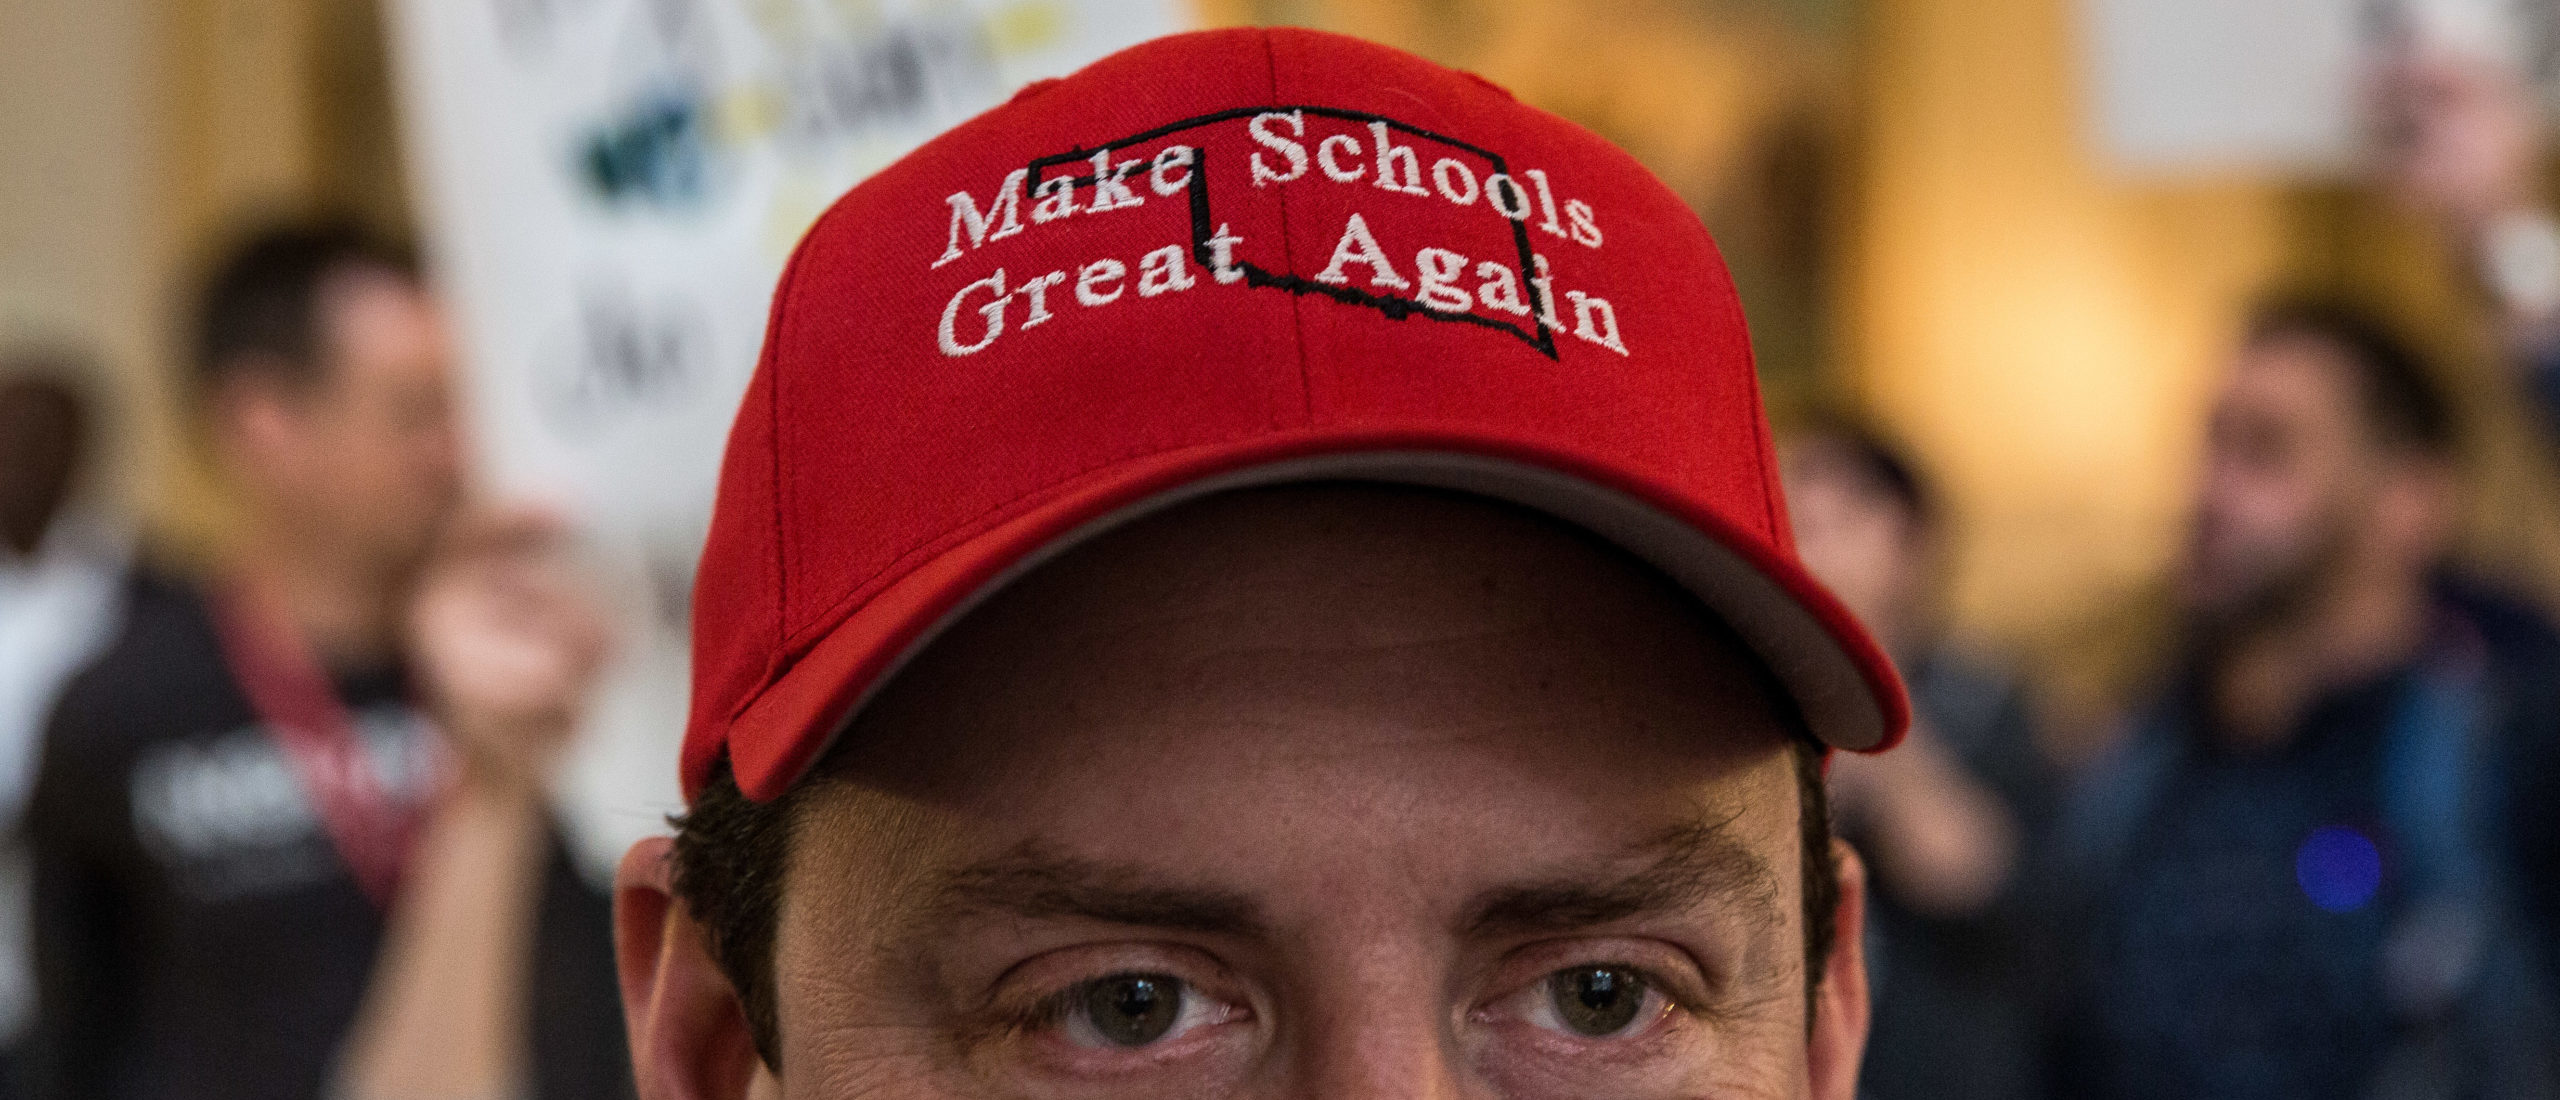 Tahlequah High School band director Josh Allen wore a custom hat at theOklahoma state Capitol building during the third day of a statewide education walkout on April 4, 2018 in Oklahoma City, Oklahoma. Teachers and their supporters are demanding increased school funding and pay raises for school workers. (Photo by Scott Heins/Getty Images)